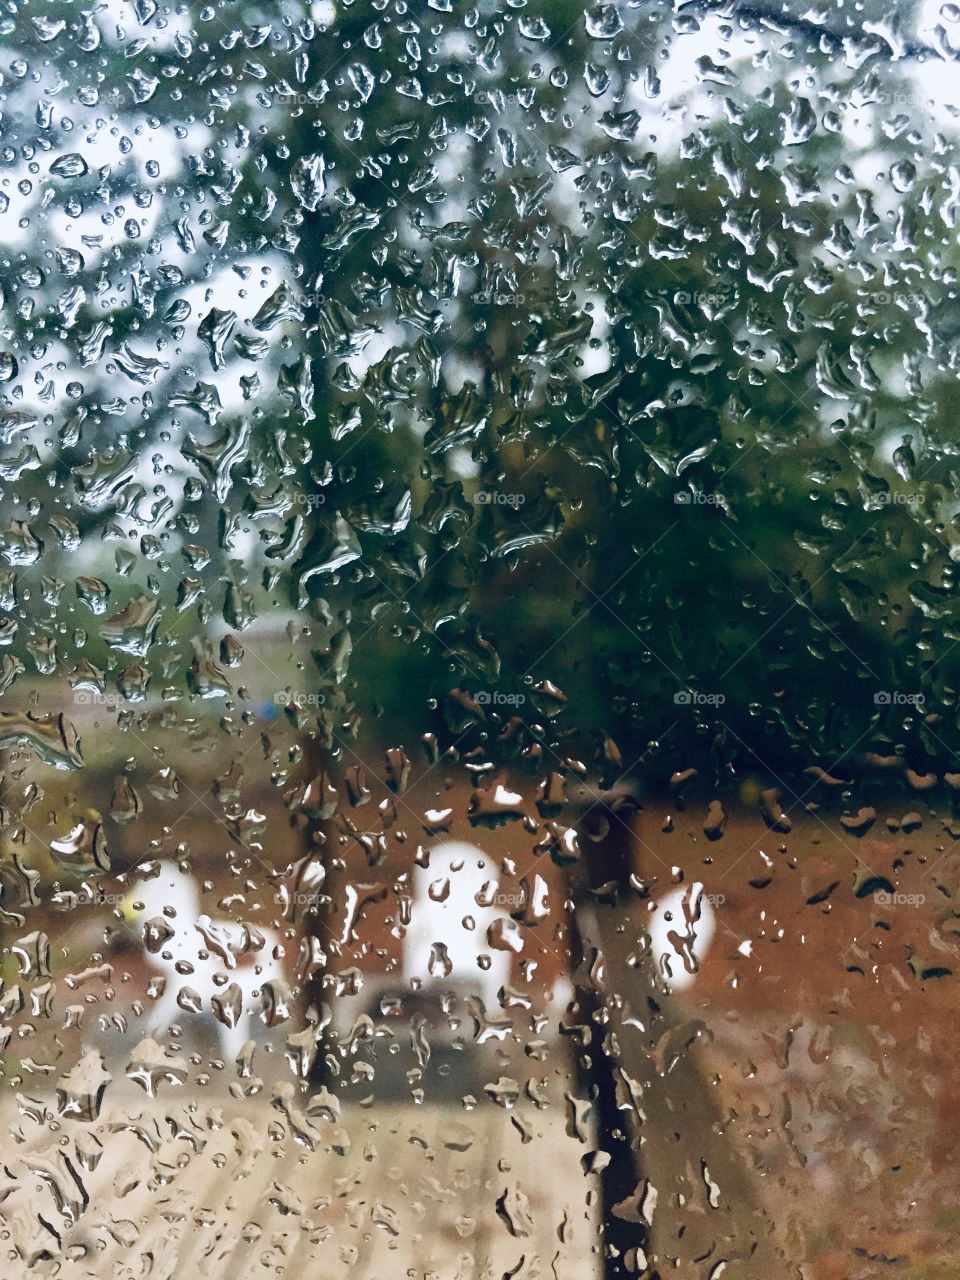 Rainy day. Raindrops on window glass. Blurred color of green and brown nature. Come again another day